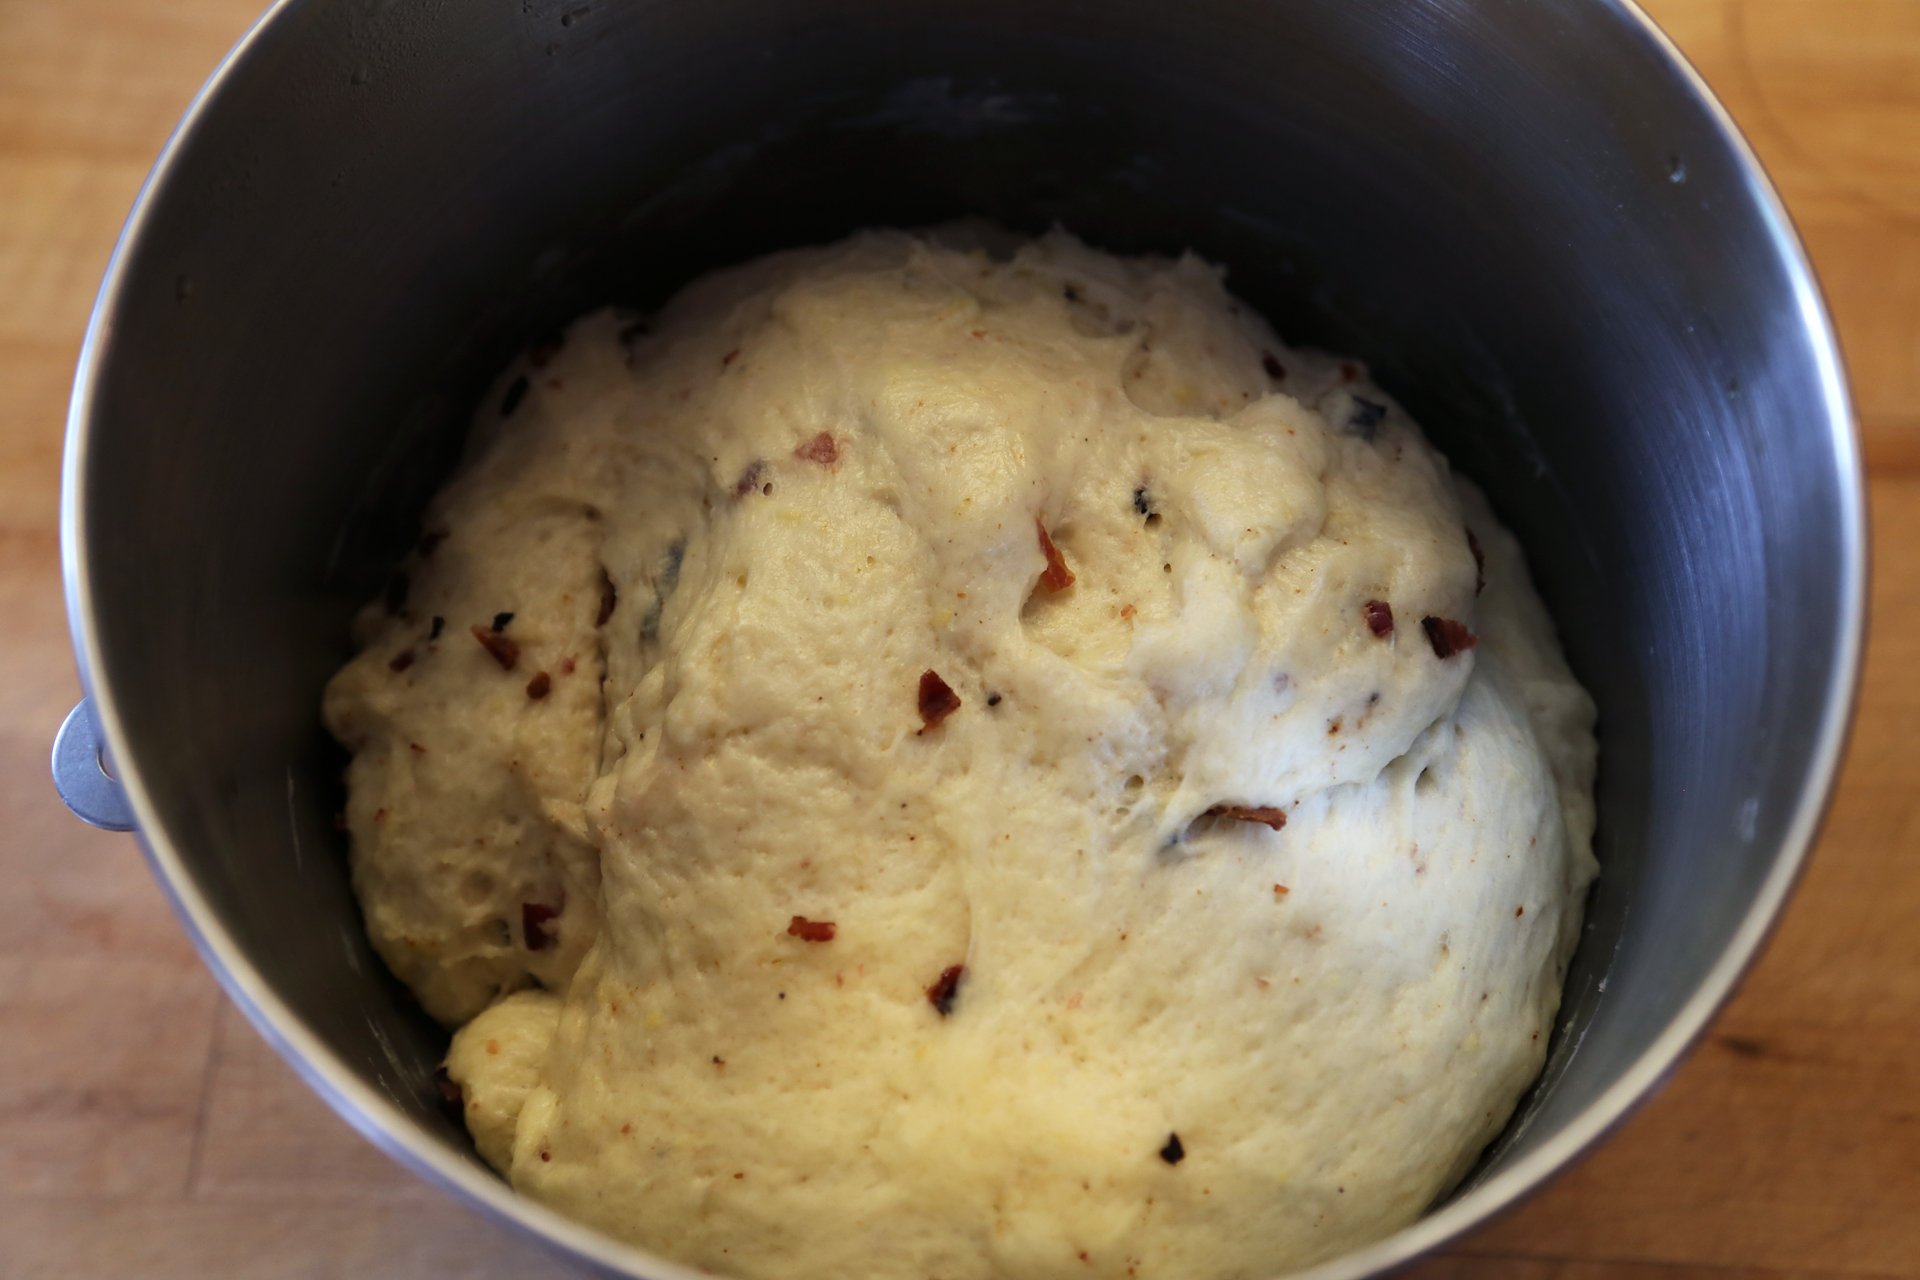 The prepared dough after it rises.